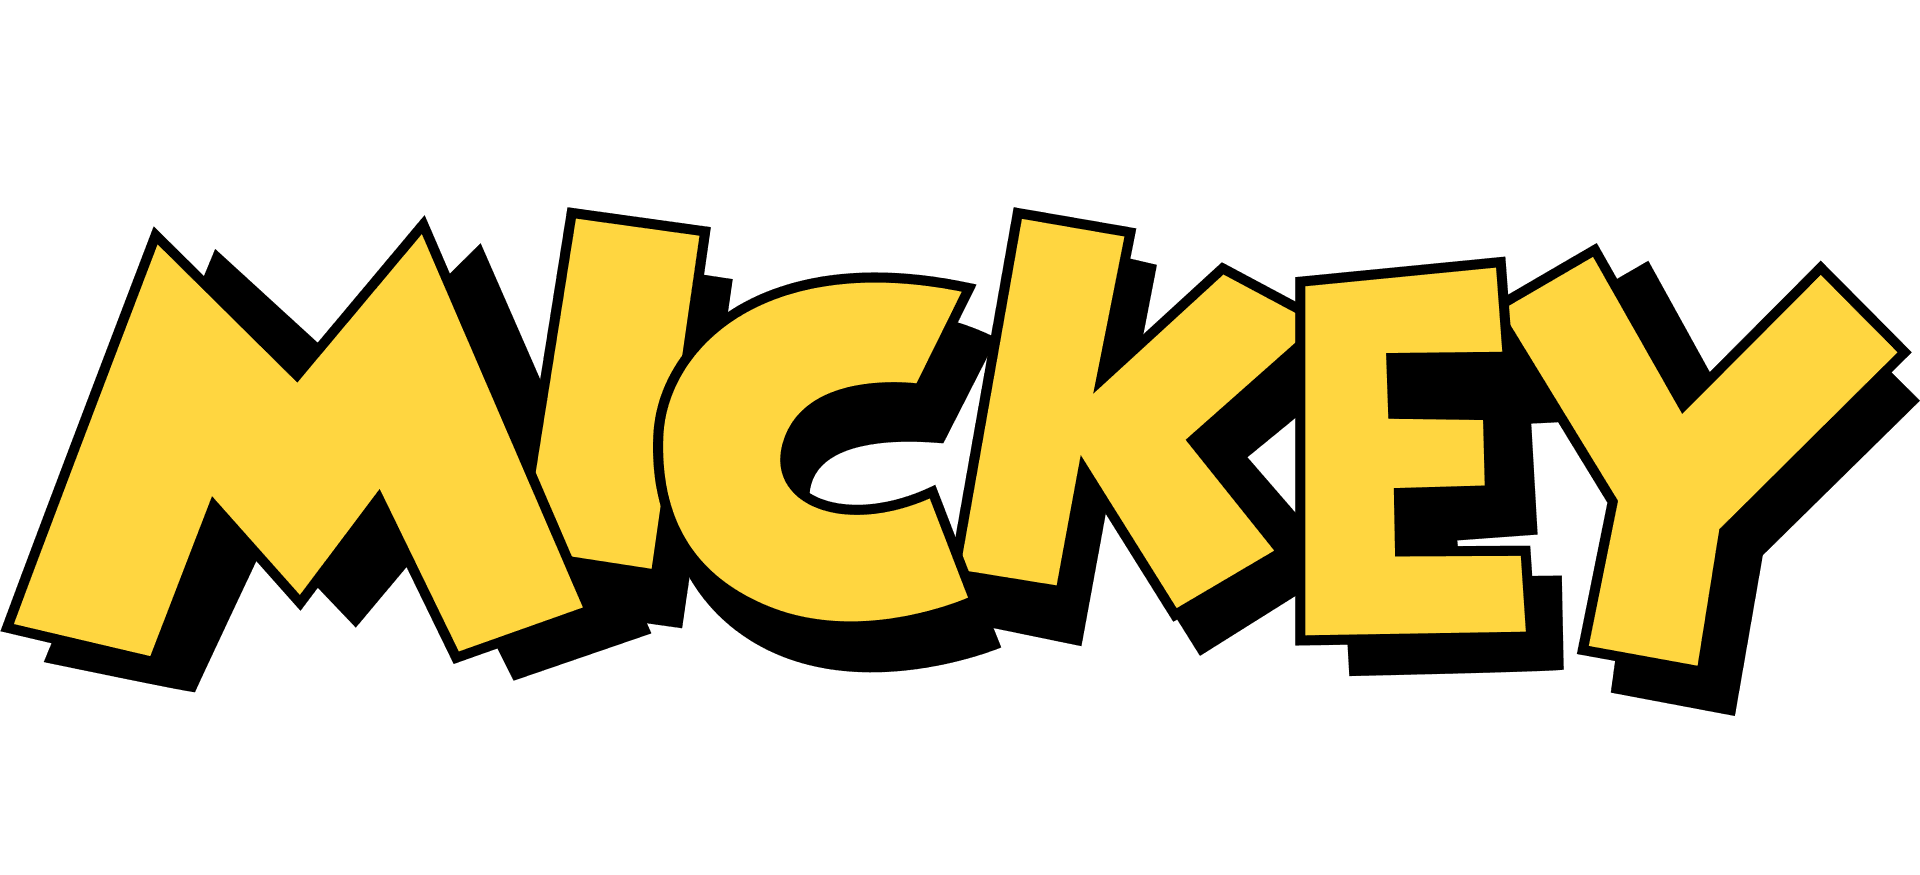 Mickey: The Story of a Mouse logo